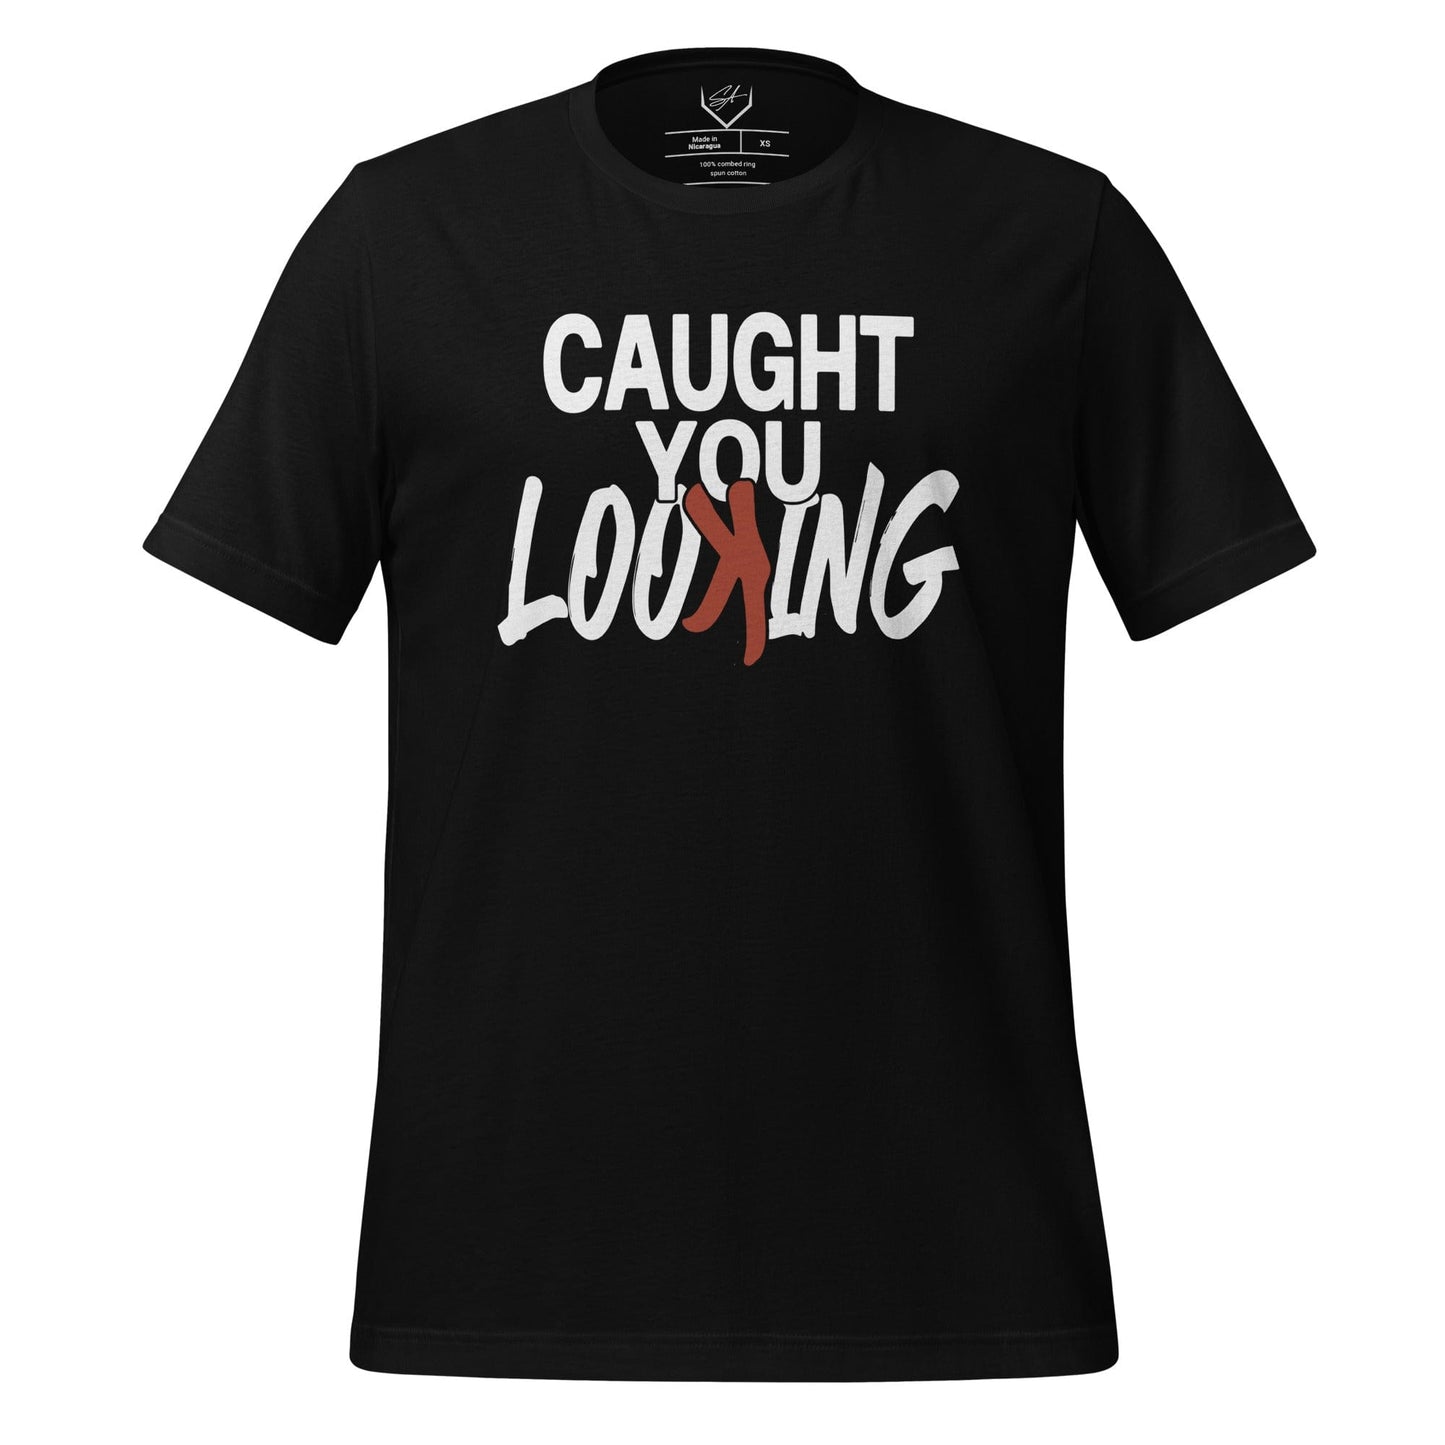 Caught You Looking - Adult Tee